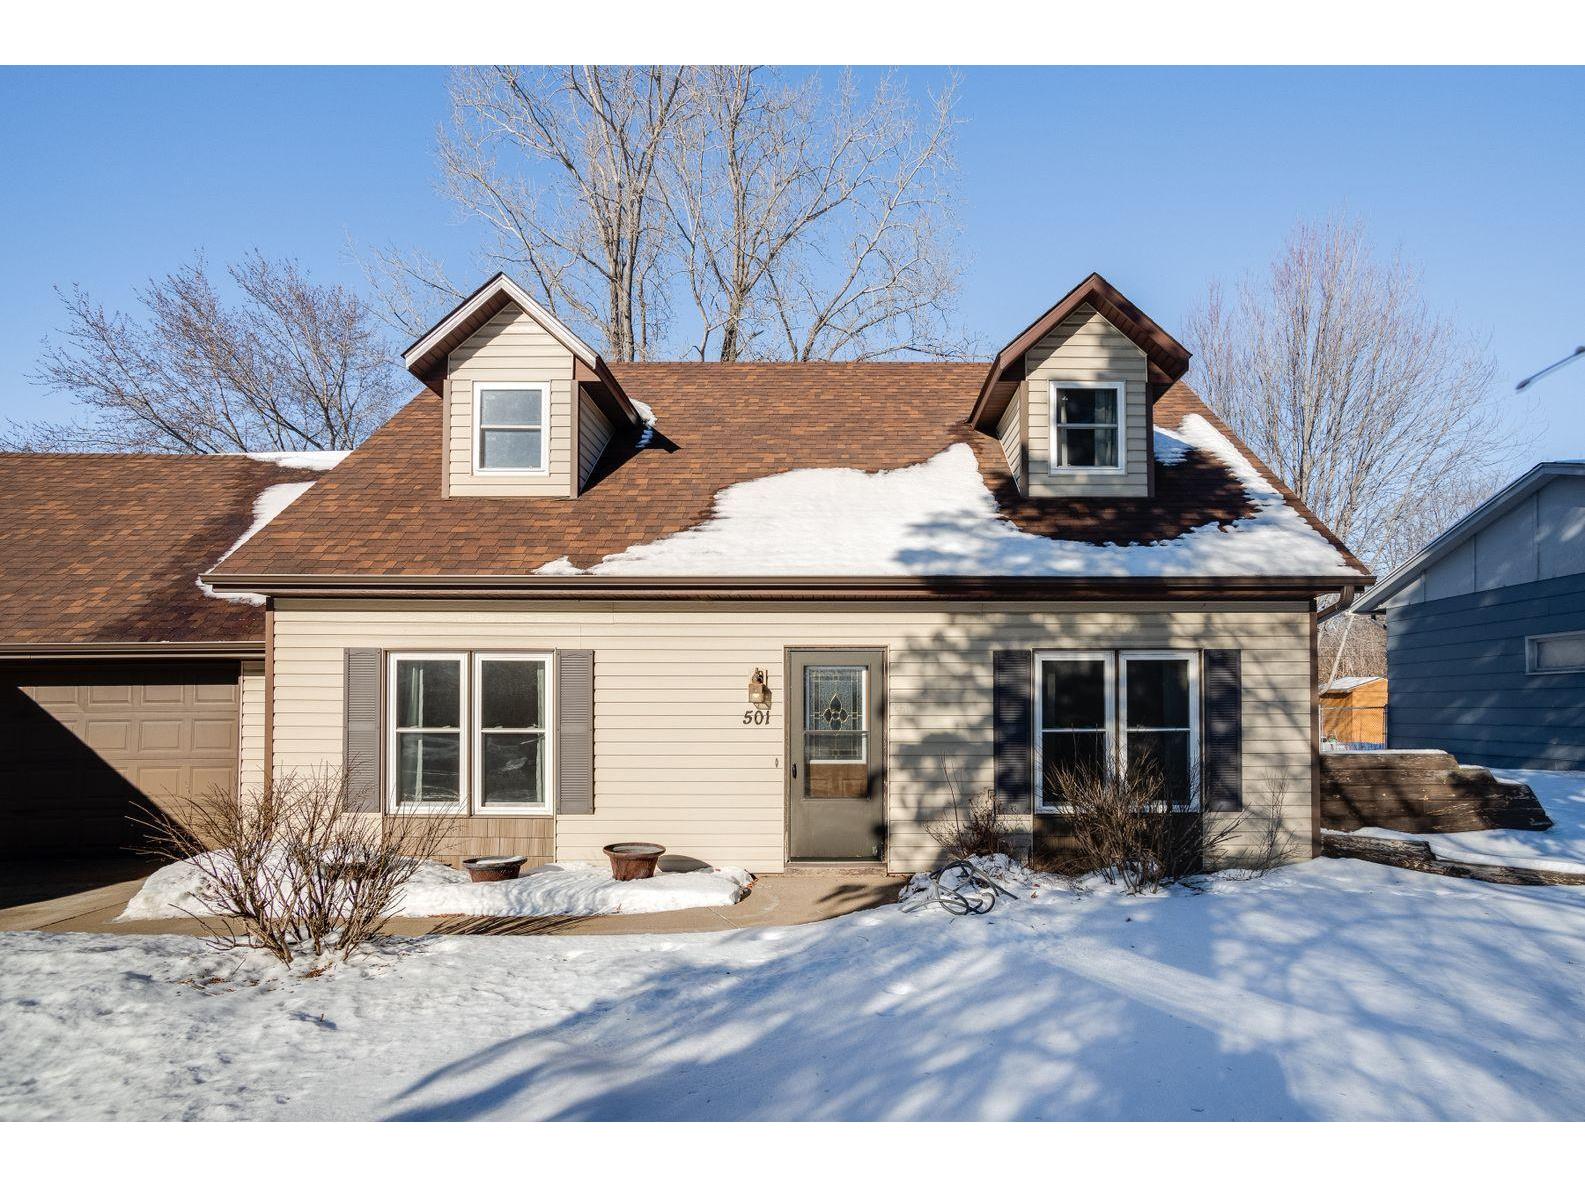 501 105th Avenue NW Coon Rapids MN 55448 6144305 image1